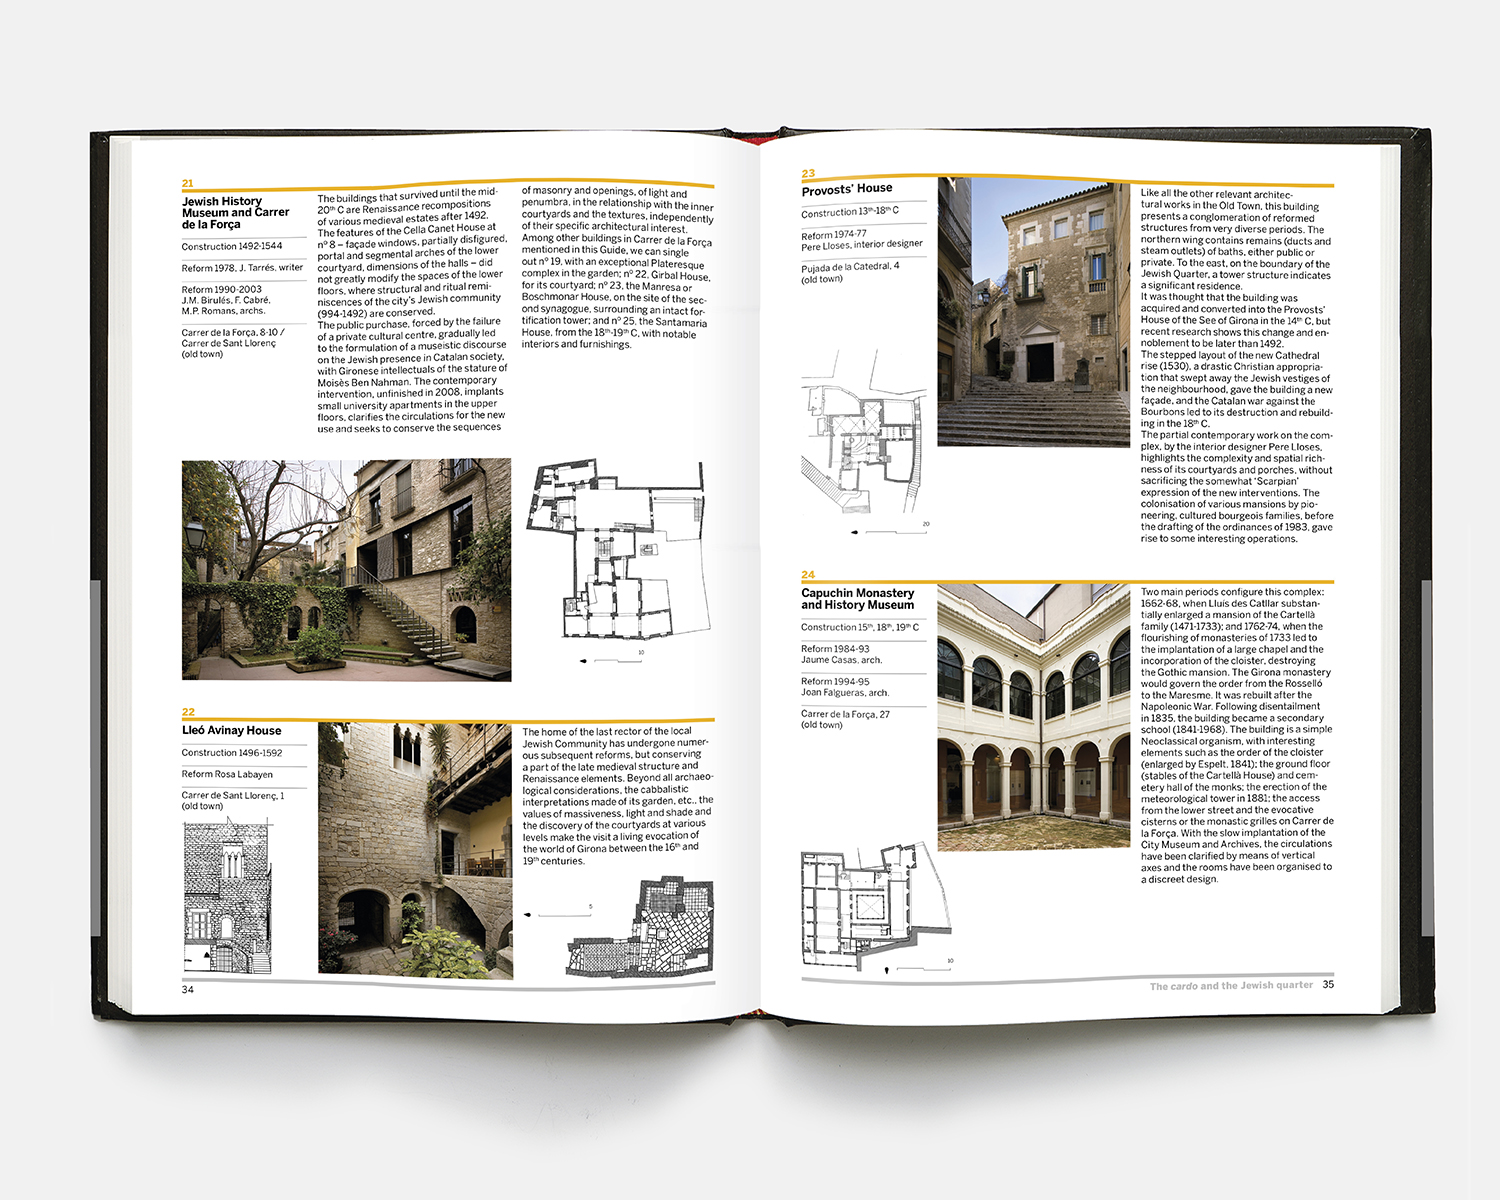 Guide to the Architecture of Girona gag 5